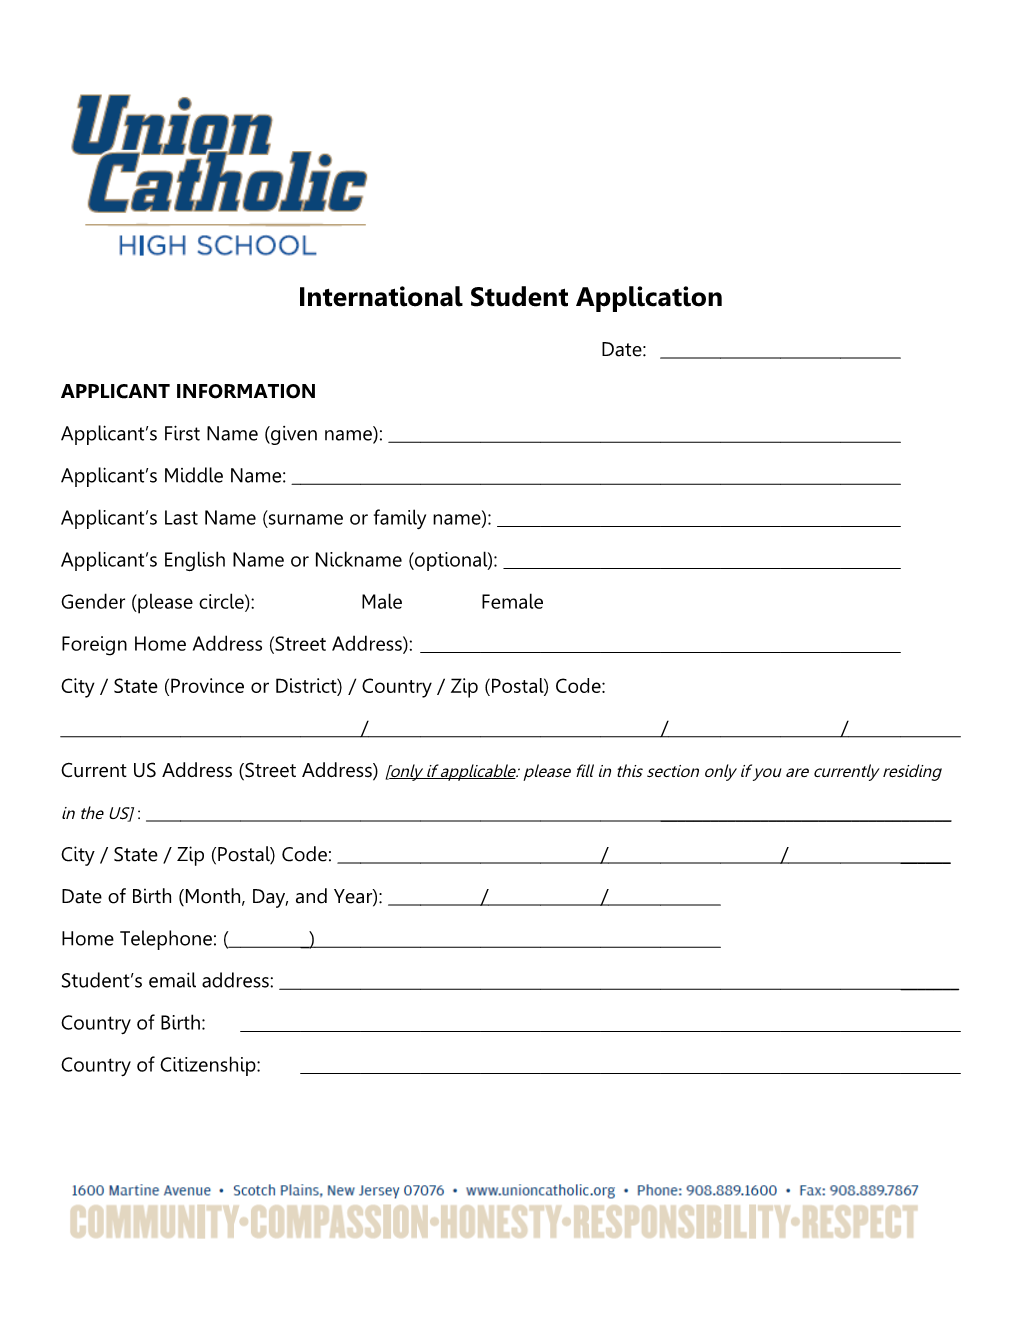 Appication for International Students